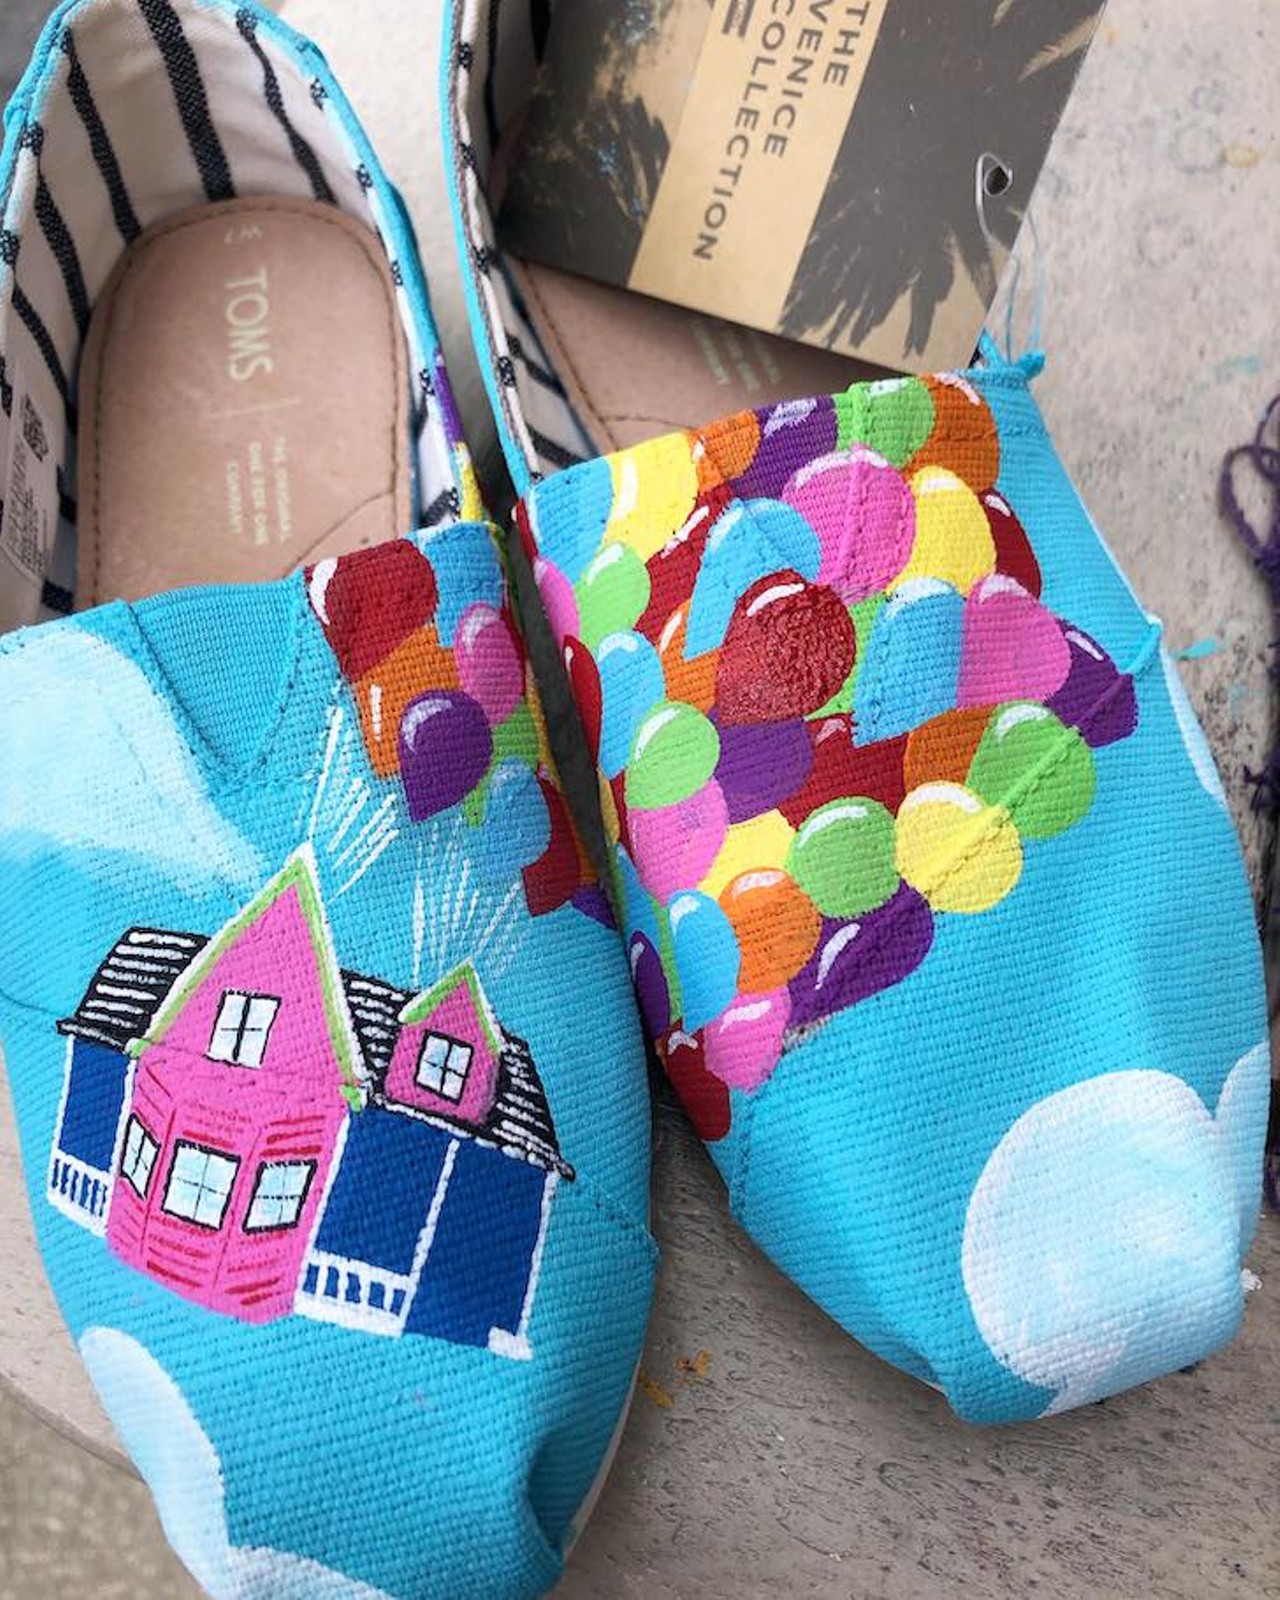 Dropshadow Design   Lena Feliciano was a TOMS Shoes painter at Curl in Disney Springs, but now sells her painted shoes, stickers and digital art prints on her Etsy shop.